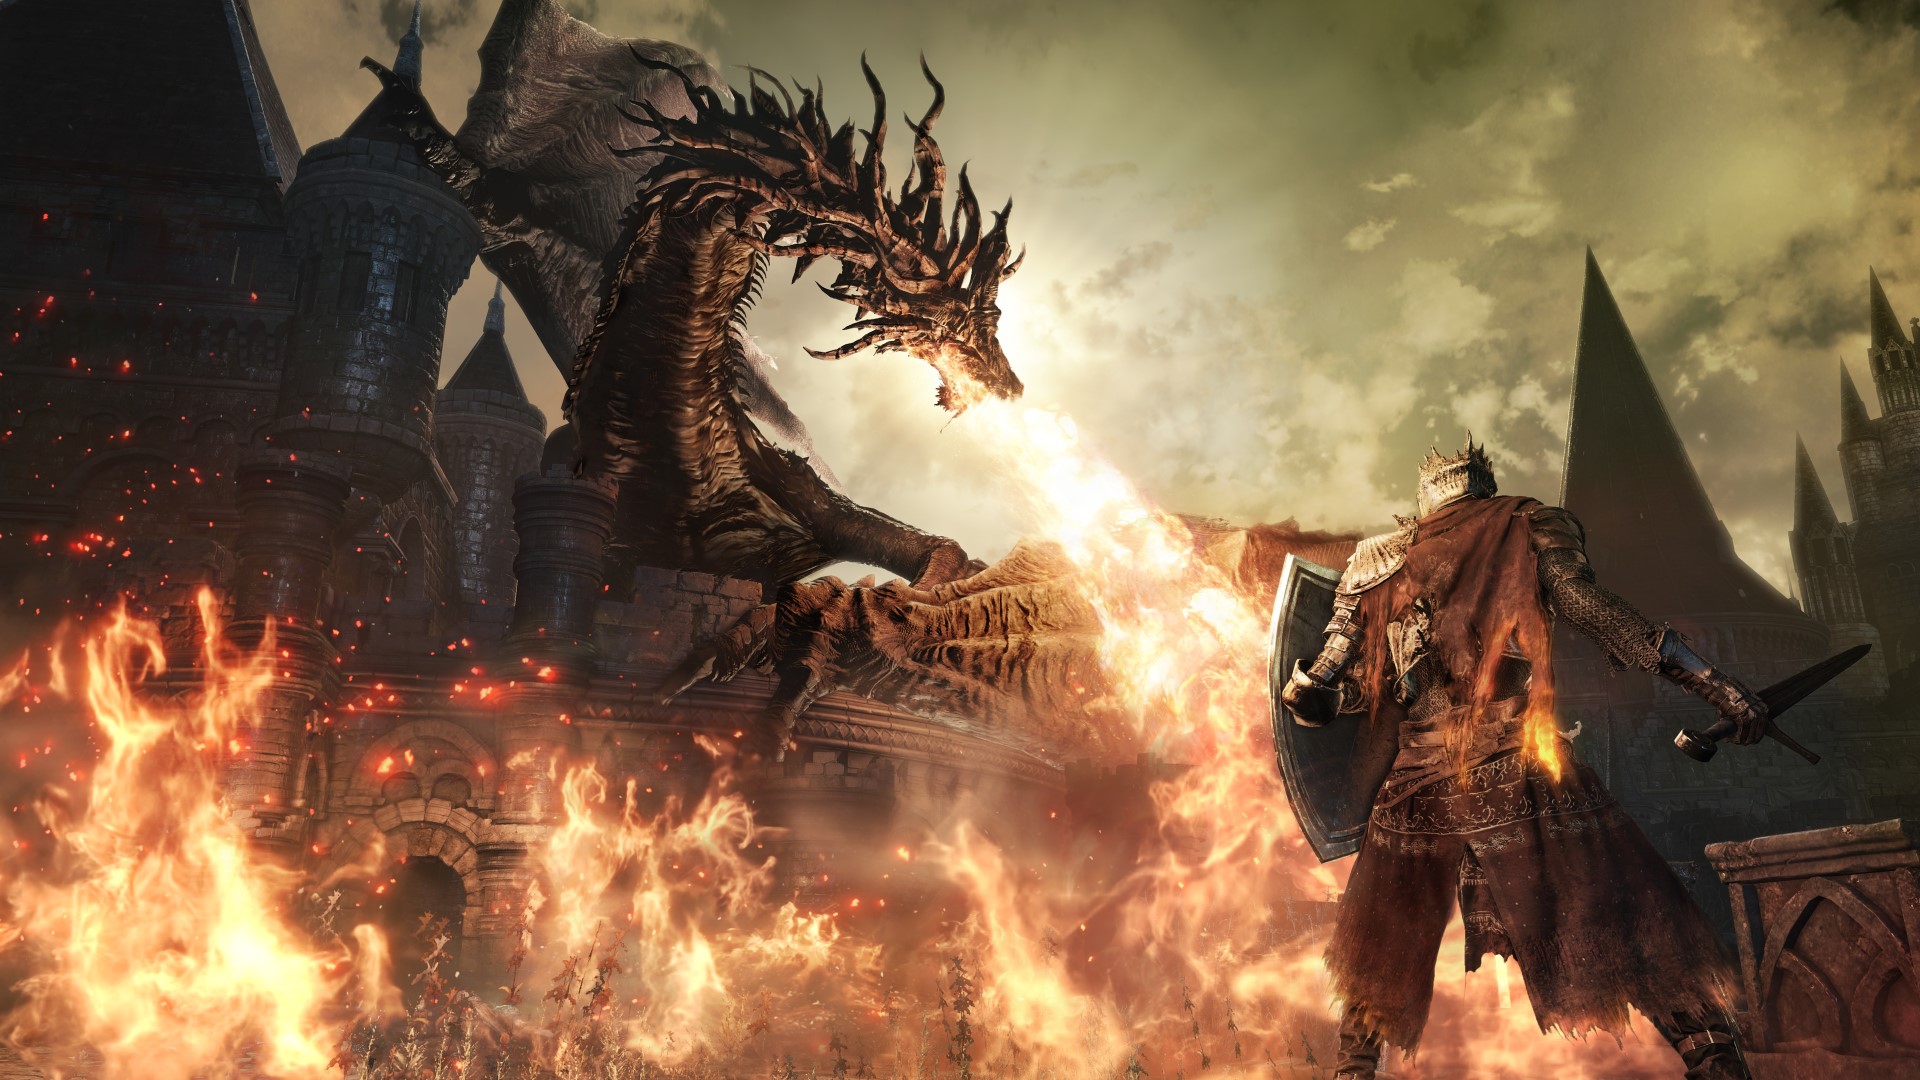 Dark Souls 3 servers have quietly come back online